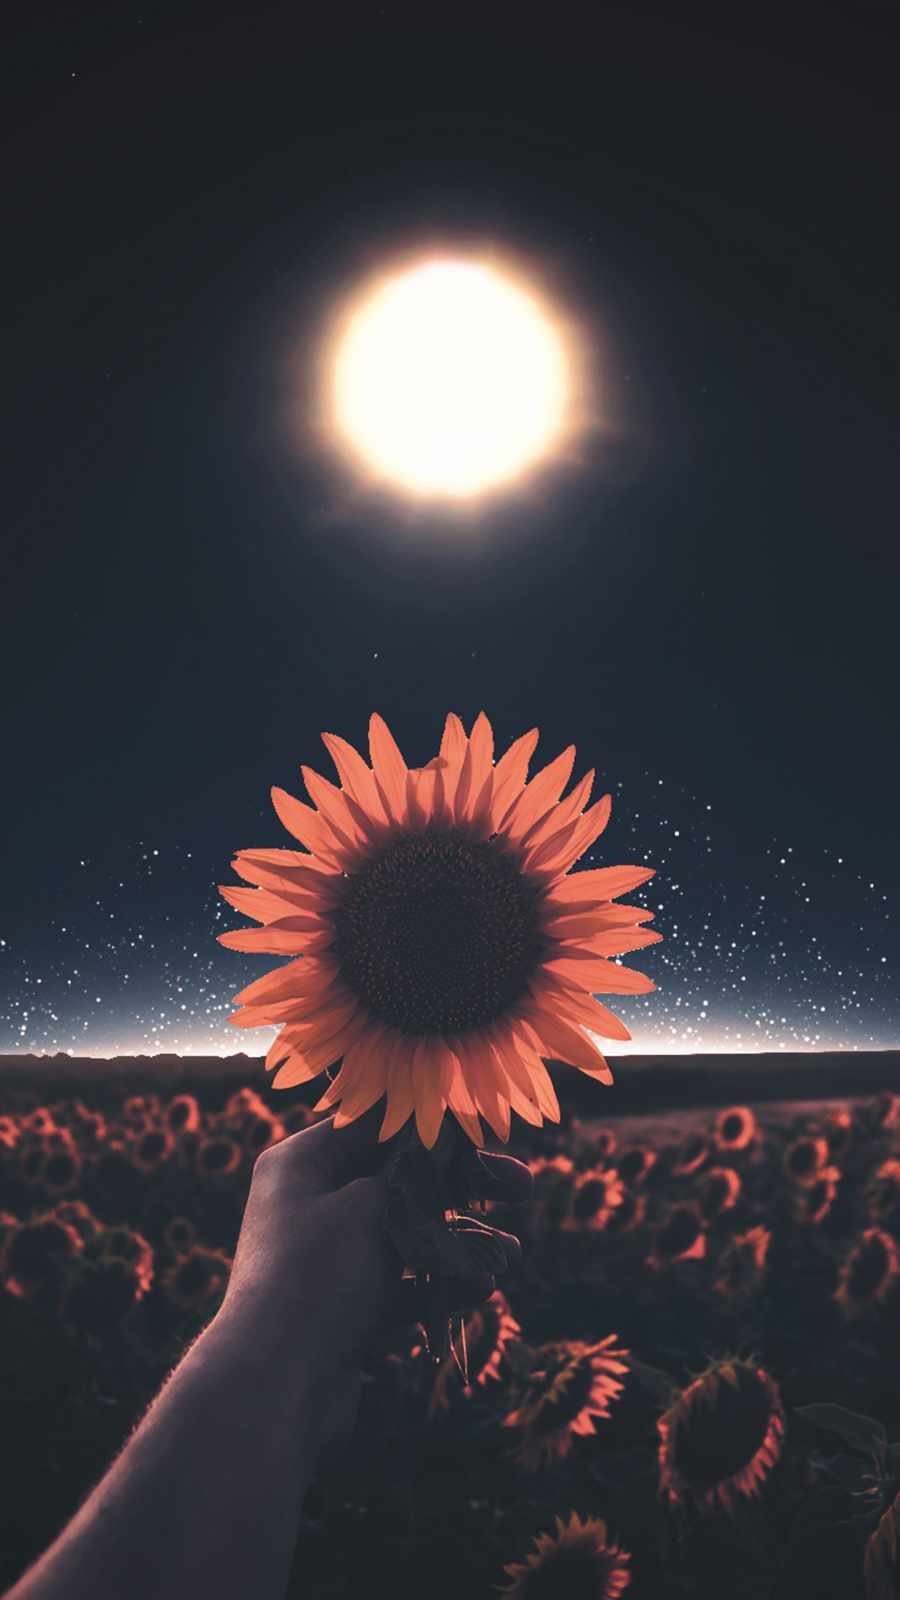 A person holding up an orange sunflower in front of the moon - Sun, sunlight